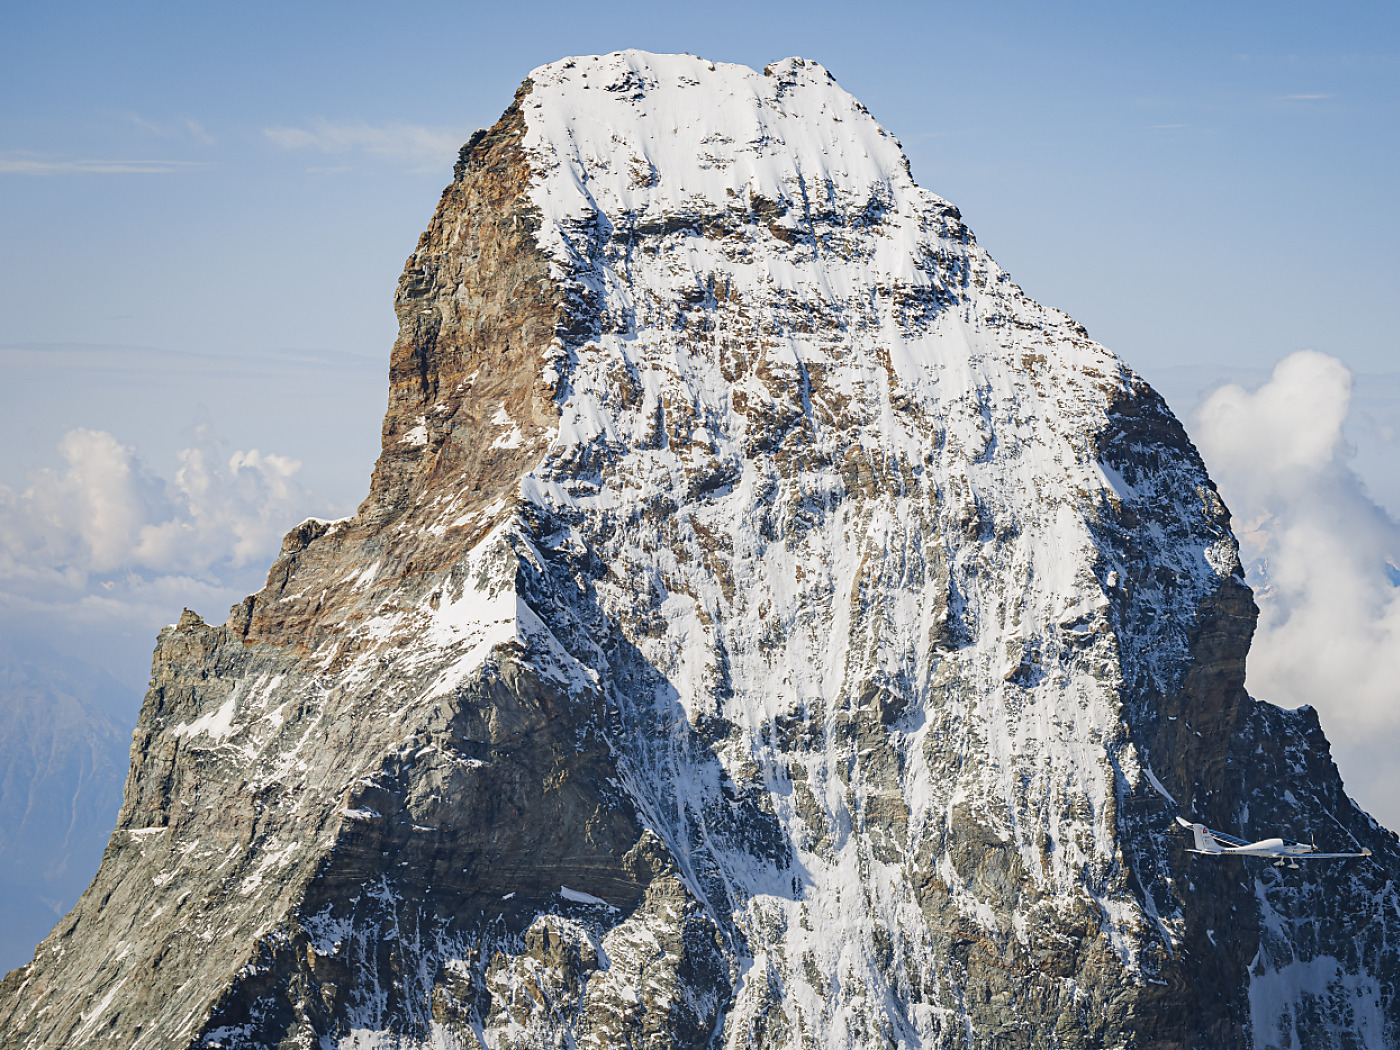 Mountaineer falls to his death after falling rocks on the Matterhorn